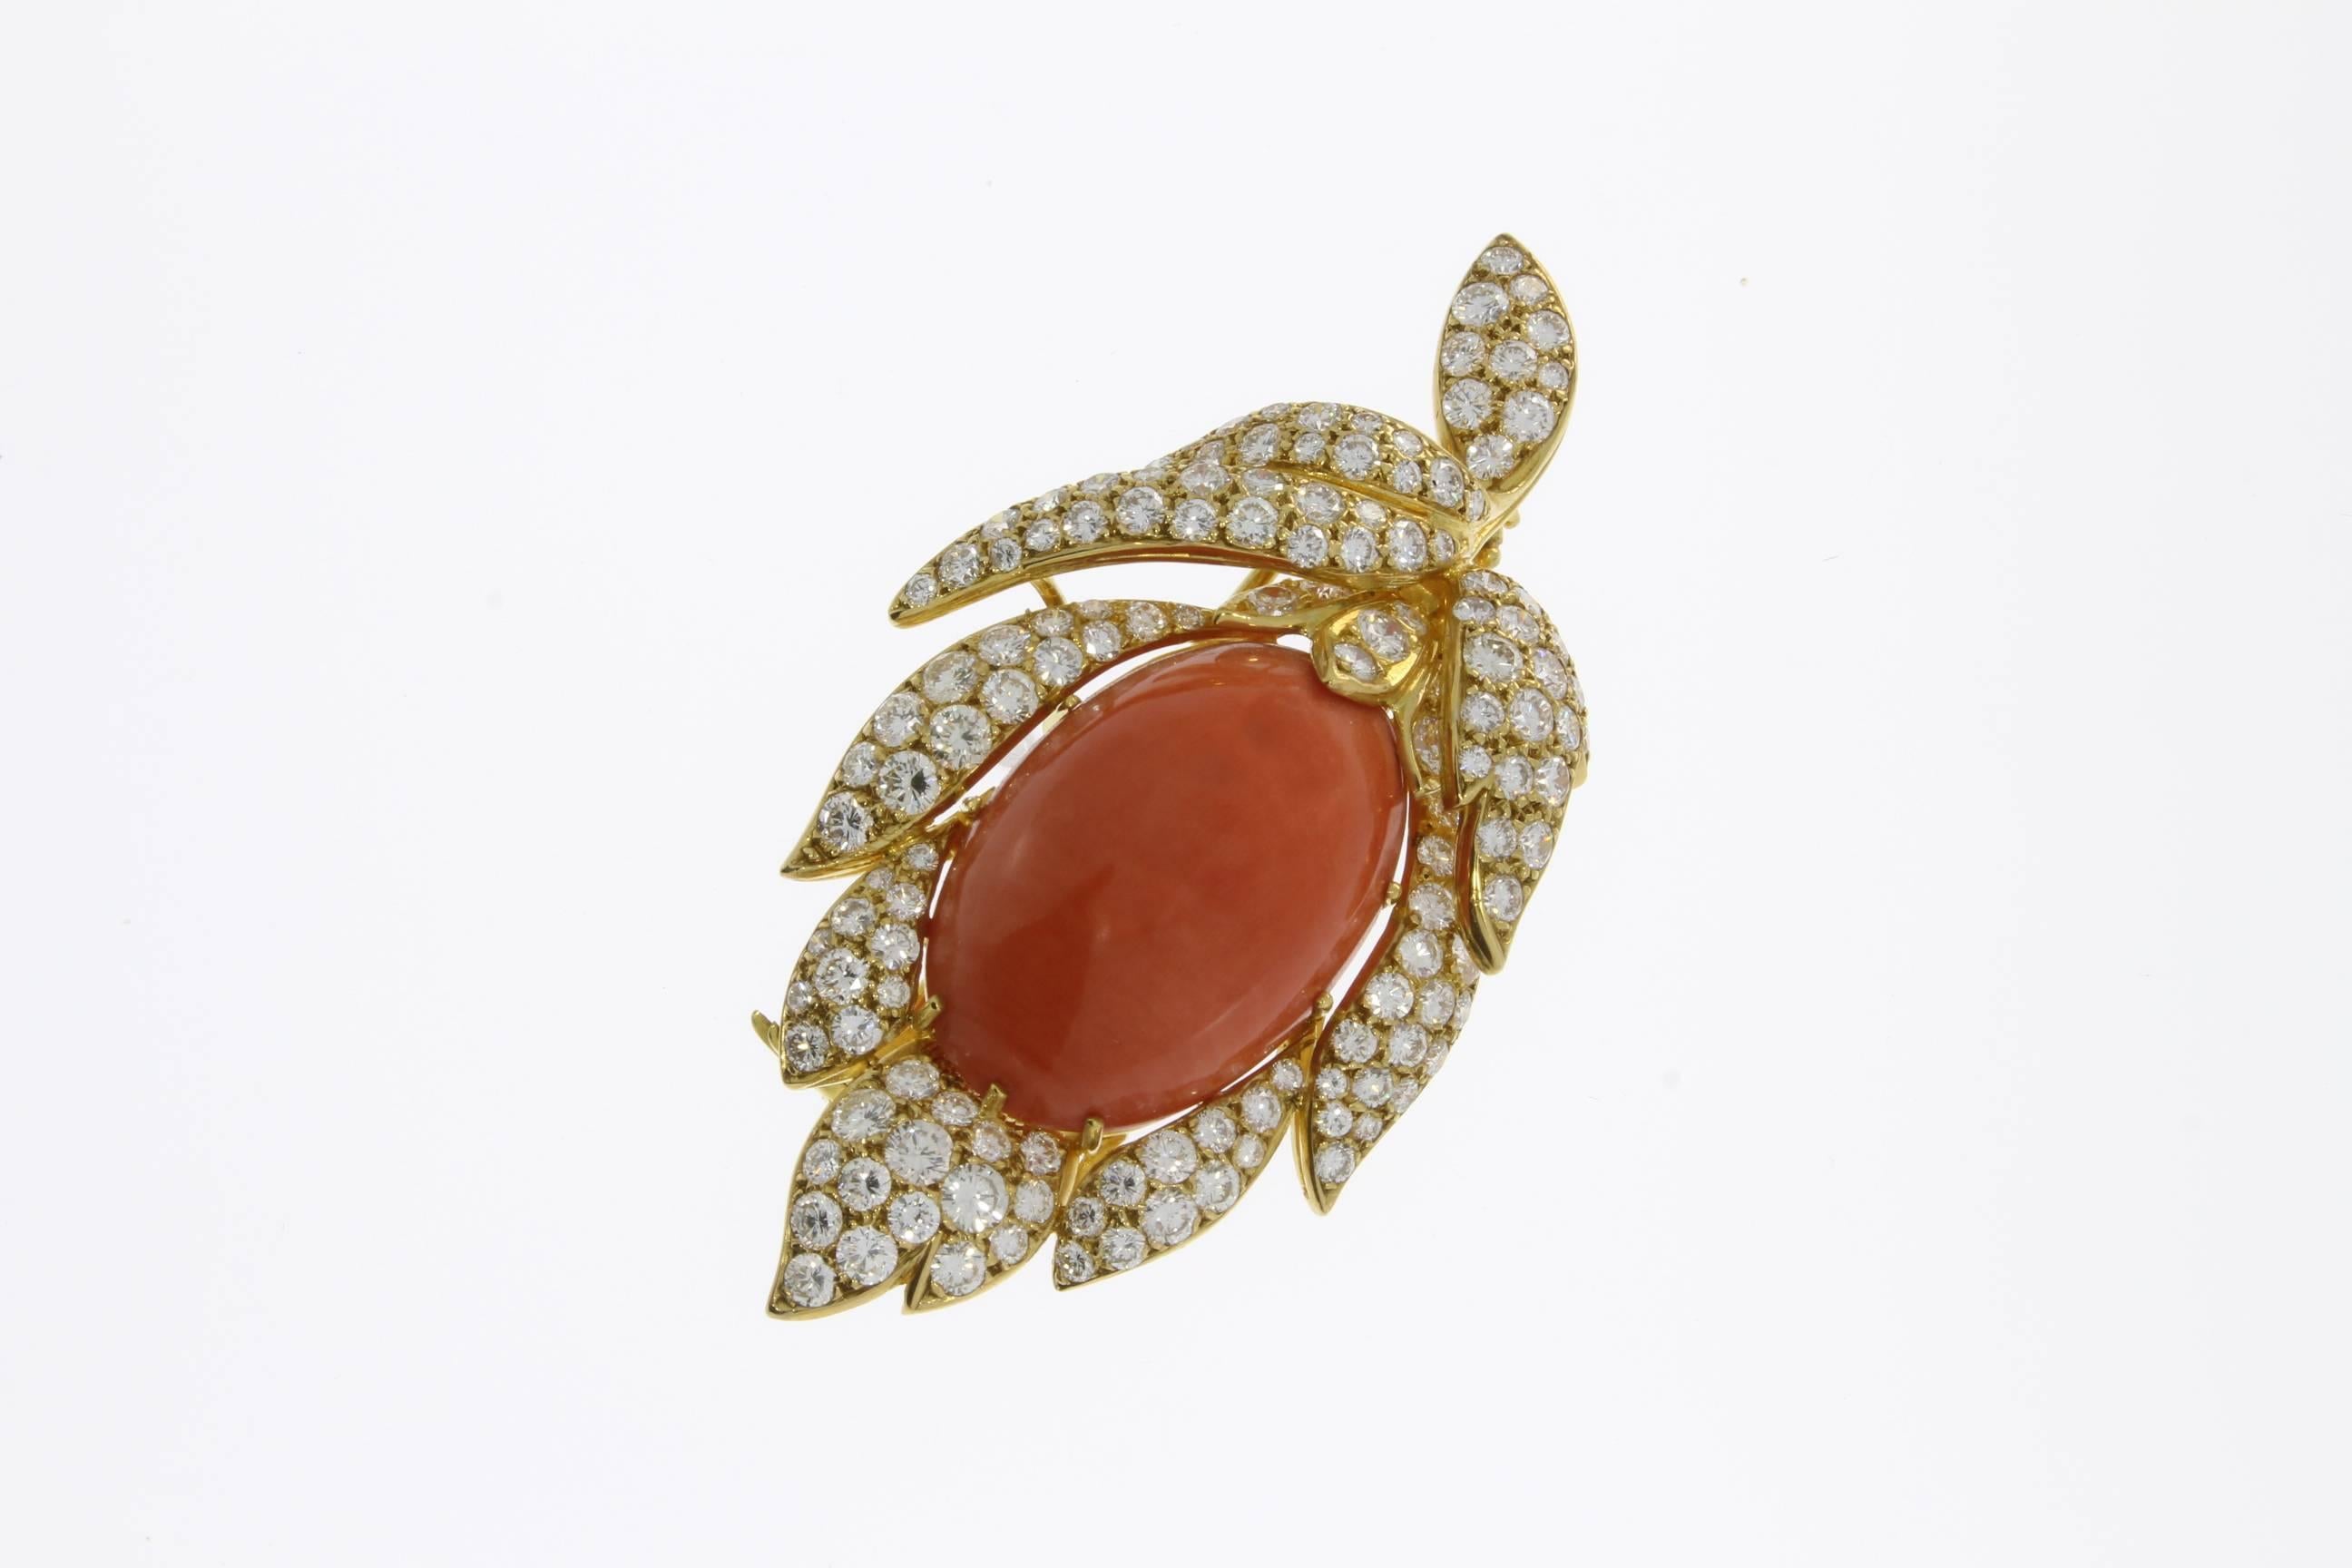 Floral shape brooch/pendant with oval momo coral cabochon in a center. Decorated with 133 brilliant-cut diamonds weighing approximately 10,0 ct. clarity: VS1, color: H ( white ). Pavé setting. Mounted in 18 K yellow gold. 
Total weight: 23,37 g.